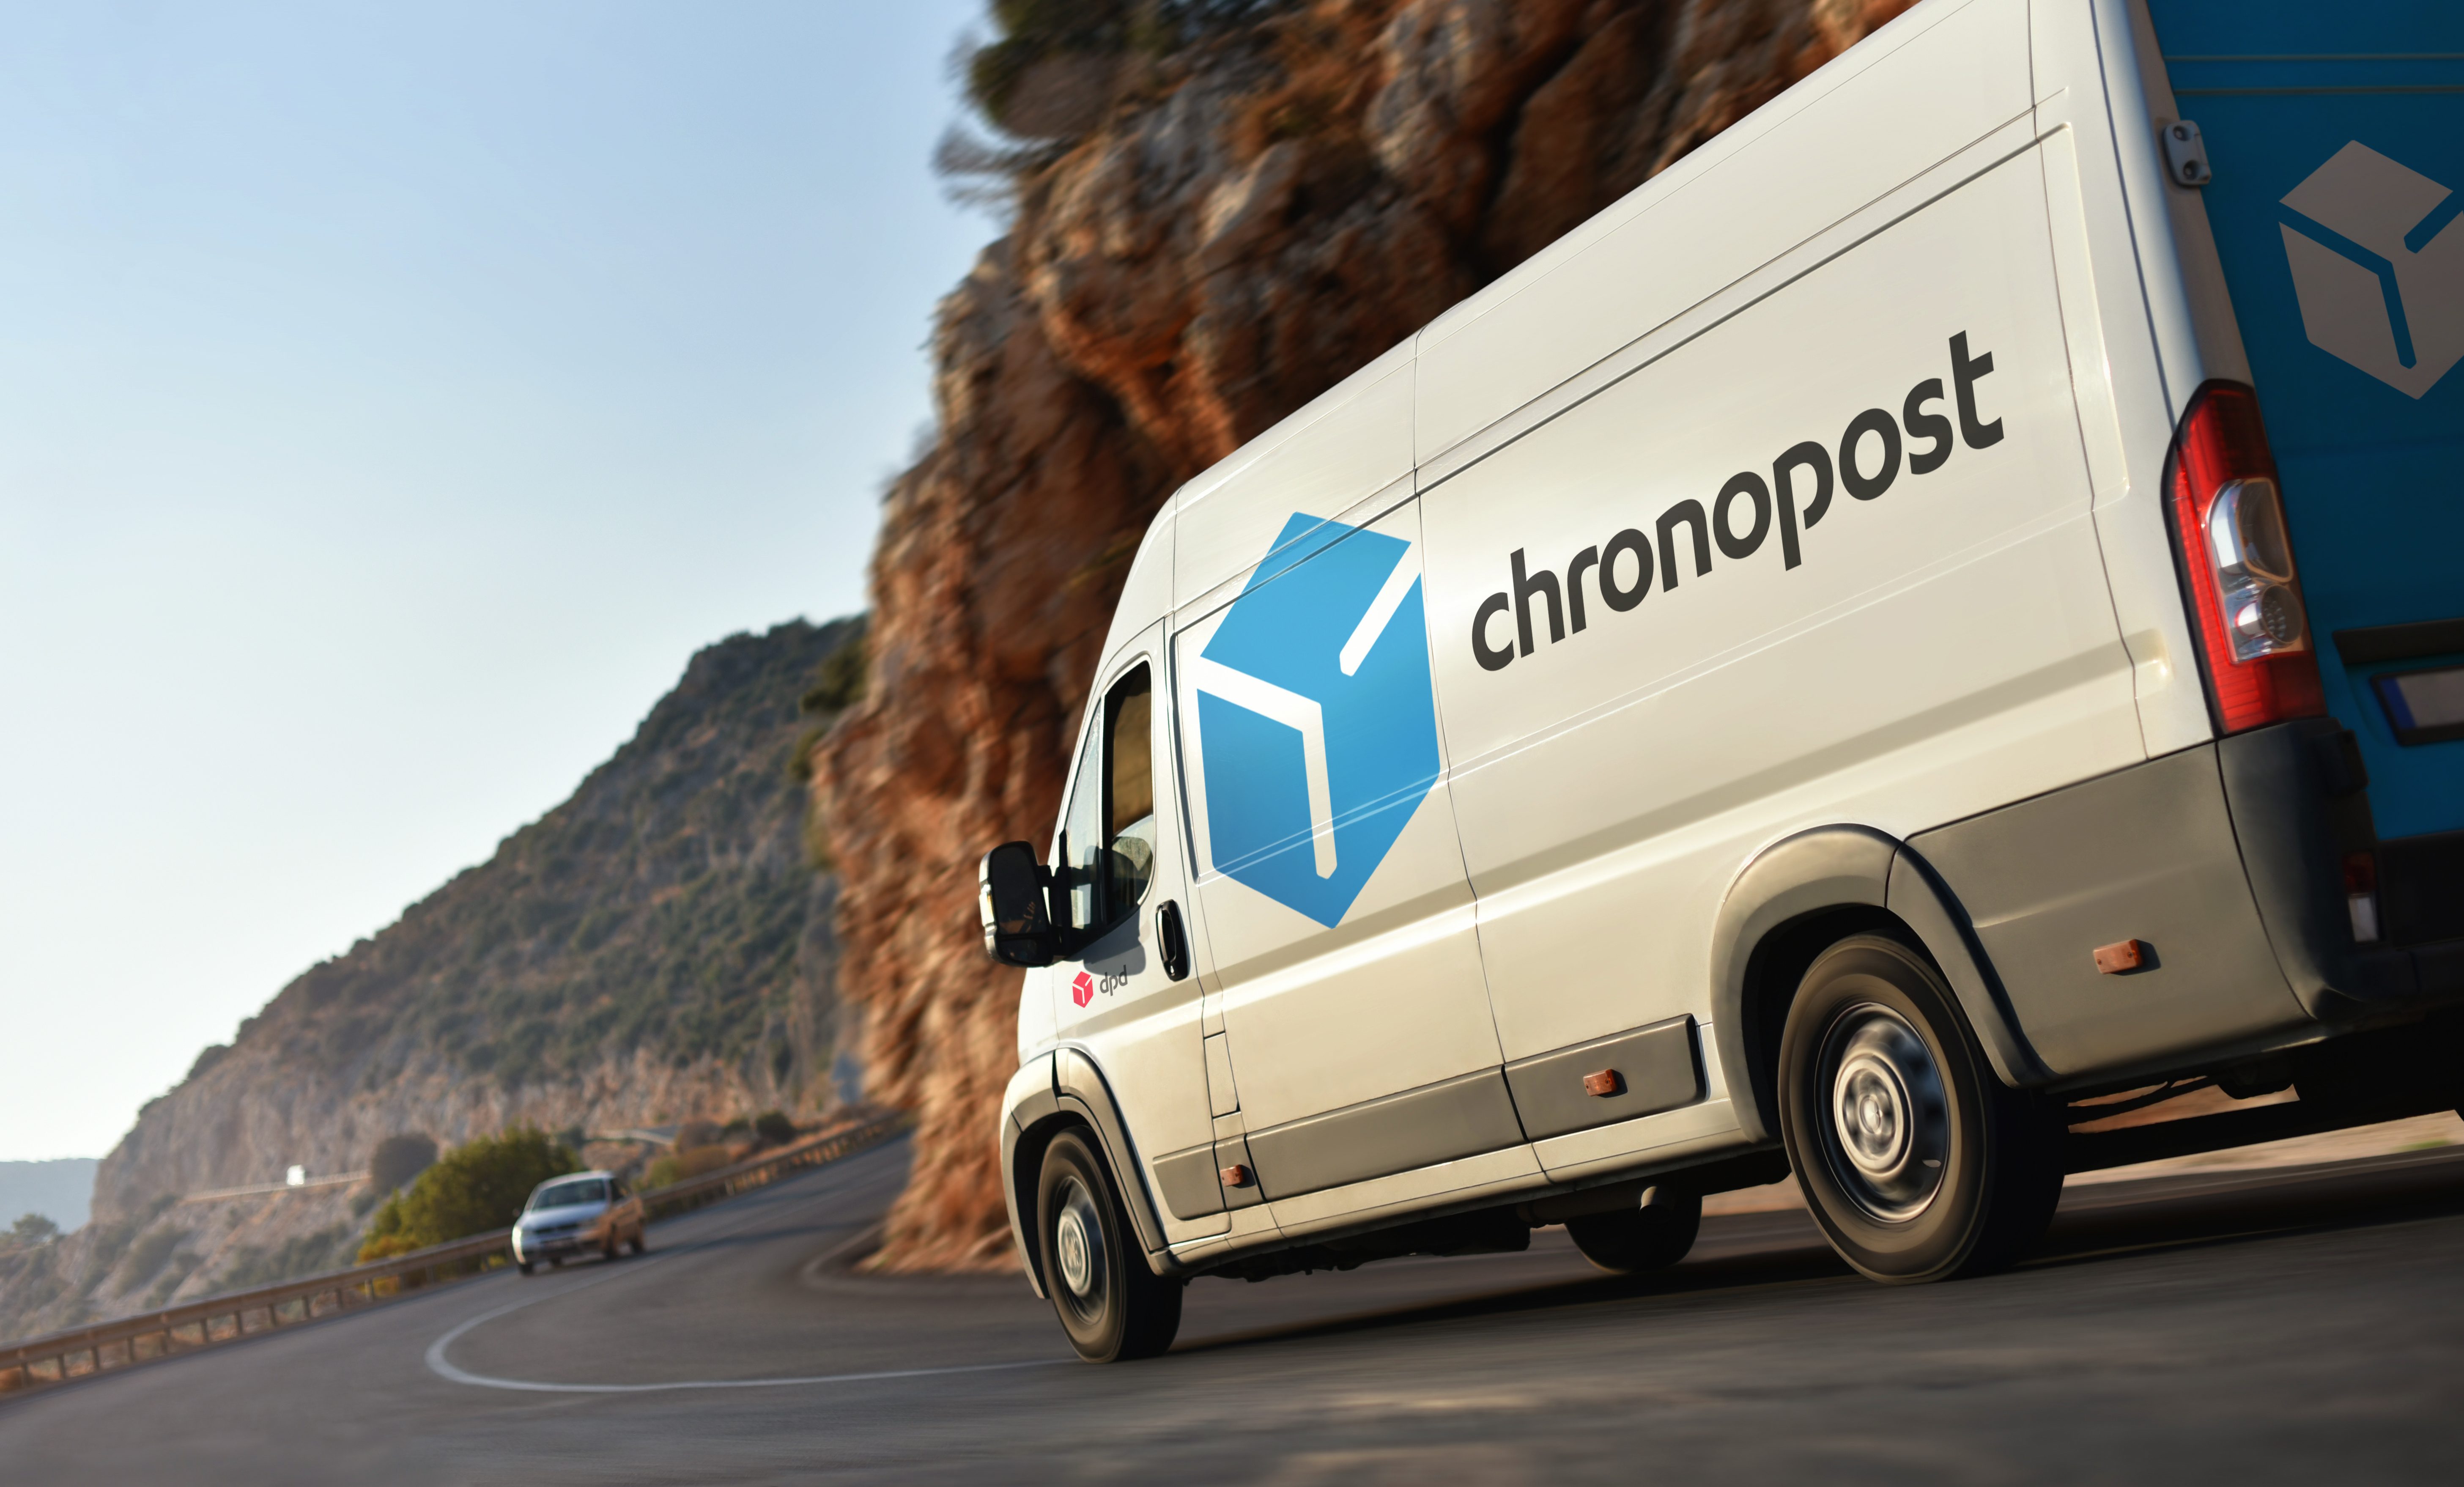 Kas / Turkey - 10.08.18: Delivery truck of Chronopost